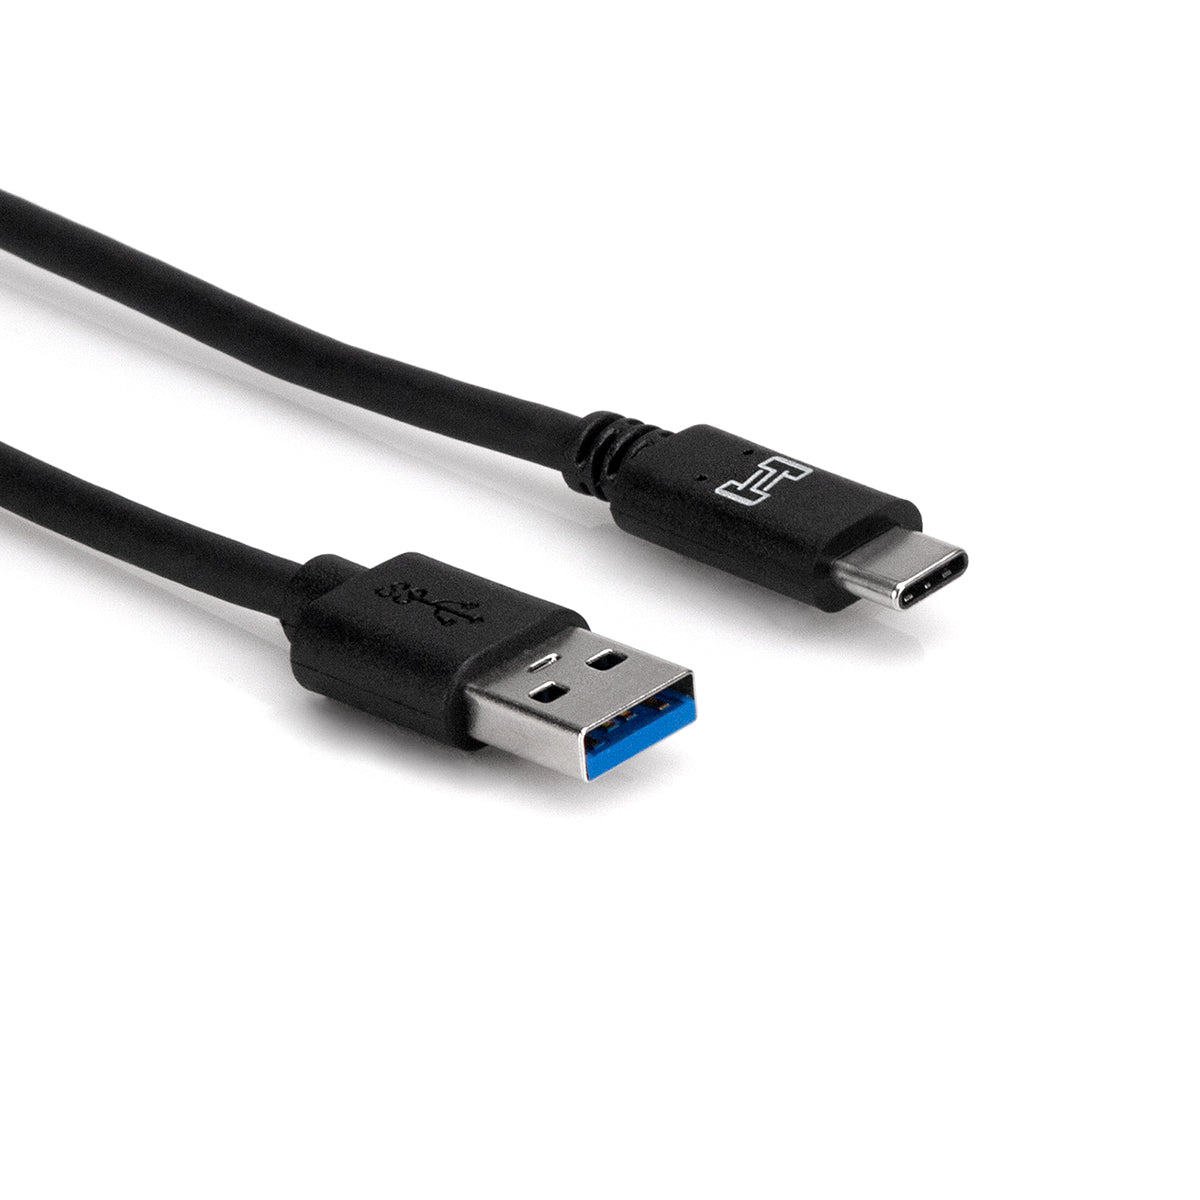 Hosa USB-306CA 6ft Superspeed USB 3.0 Type A to Type C